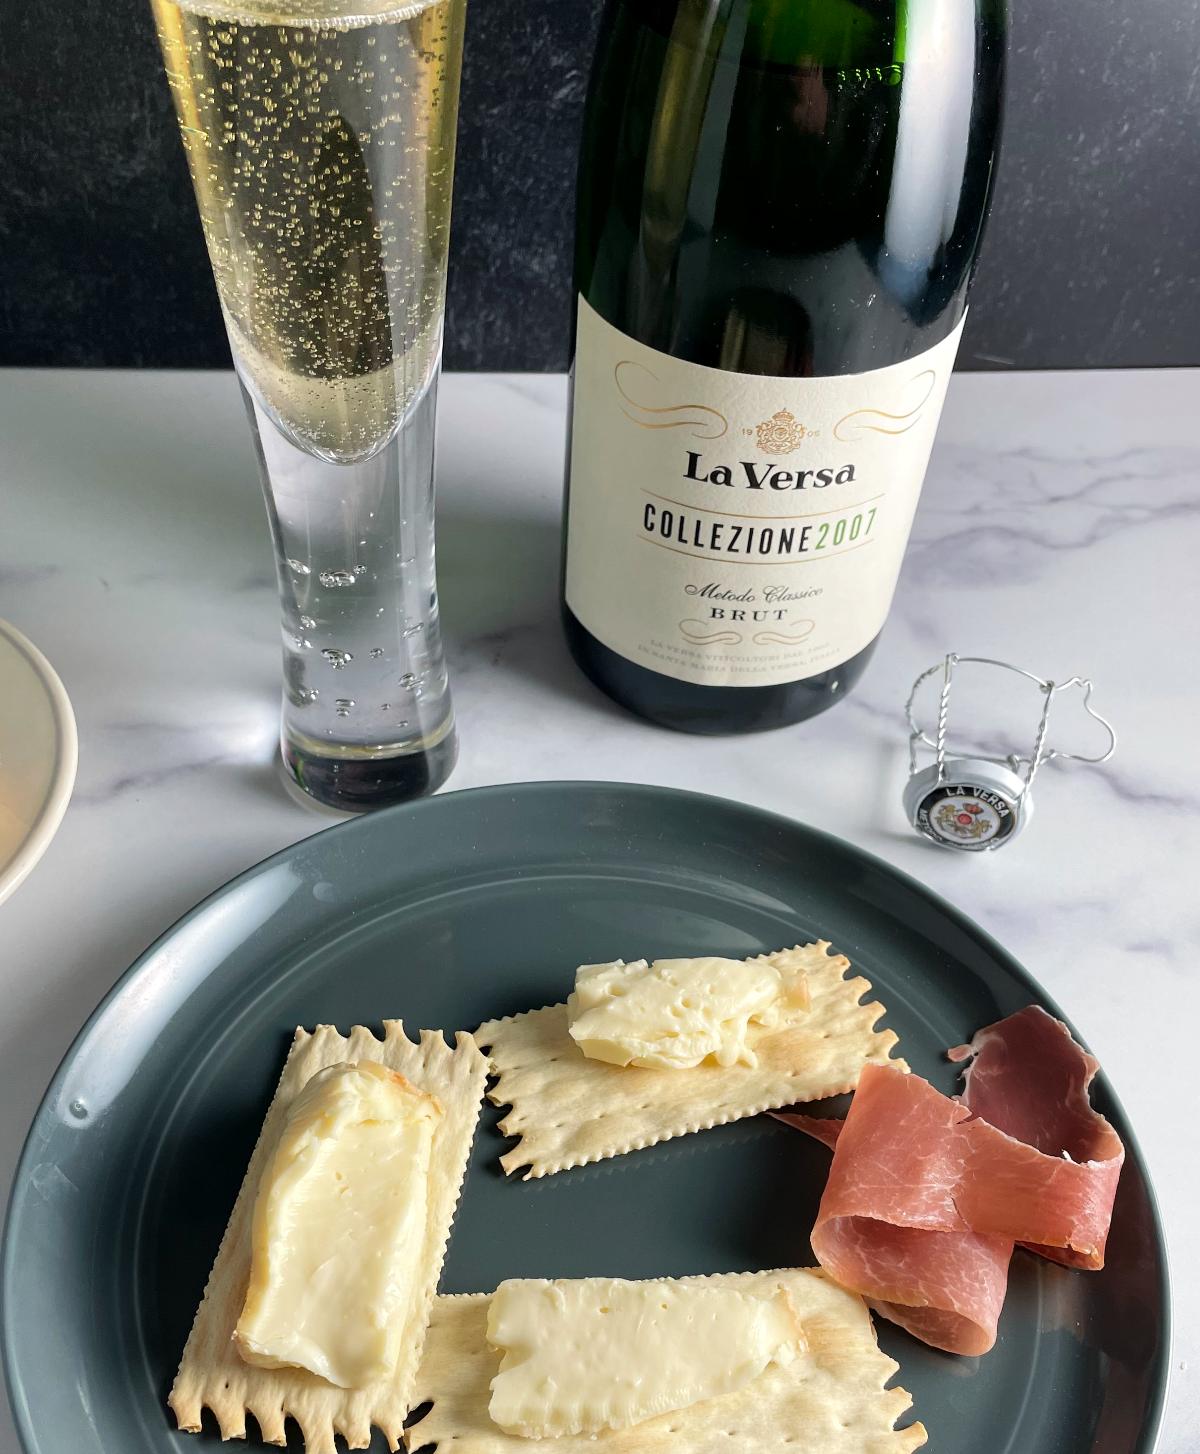 taleggio cheese served on crackers along with prosciutto and a sparkling wine.